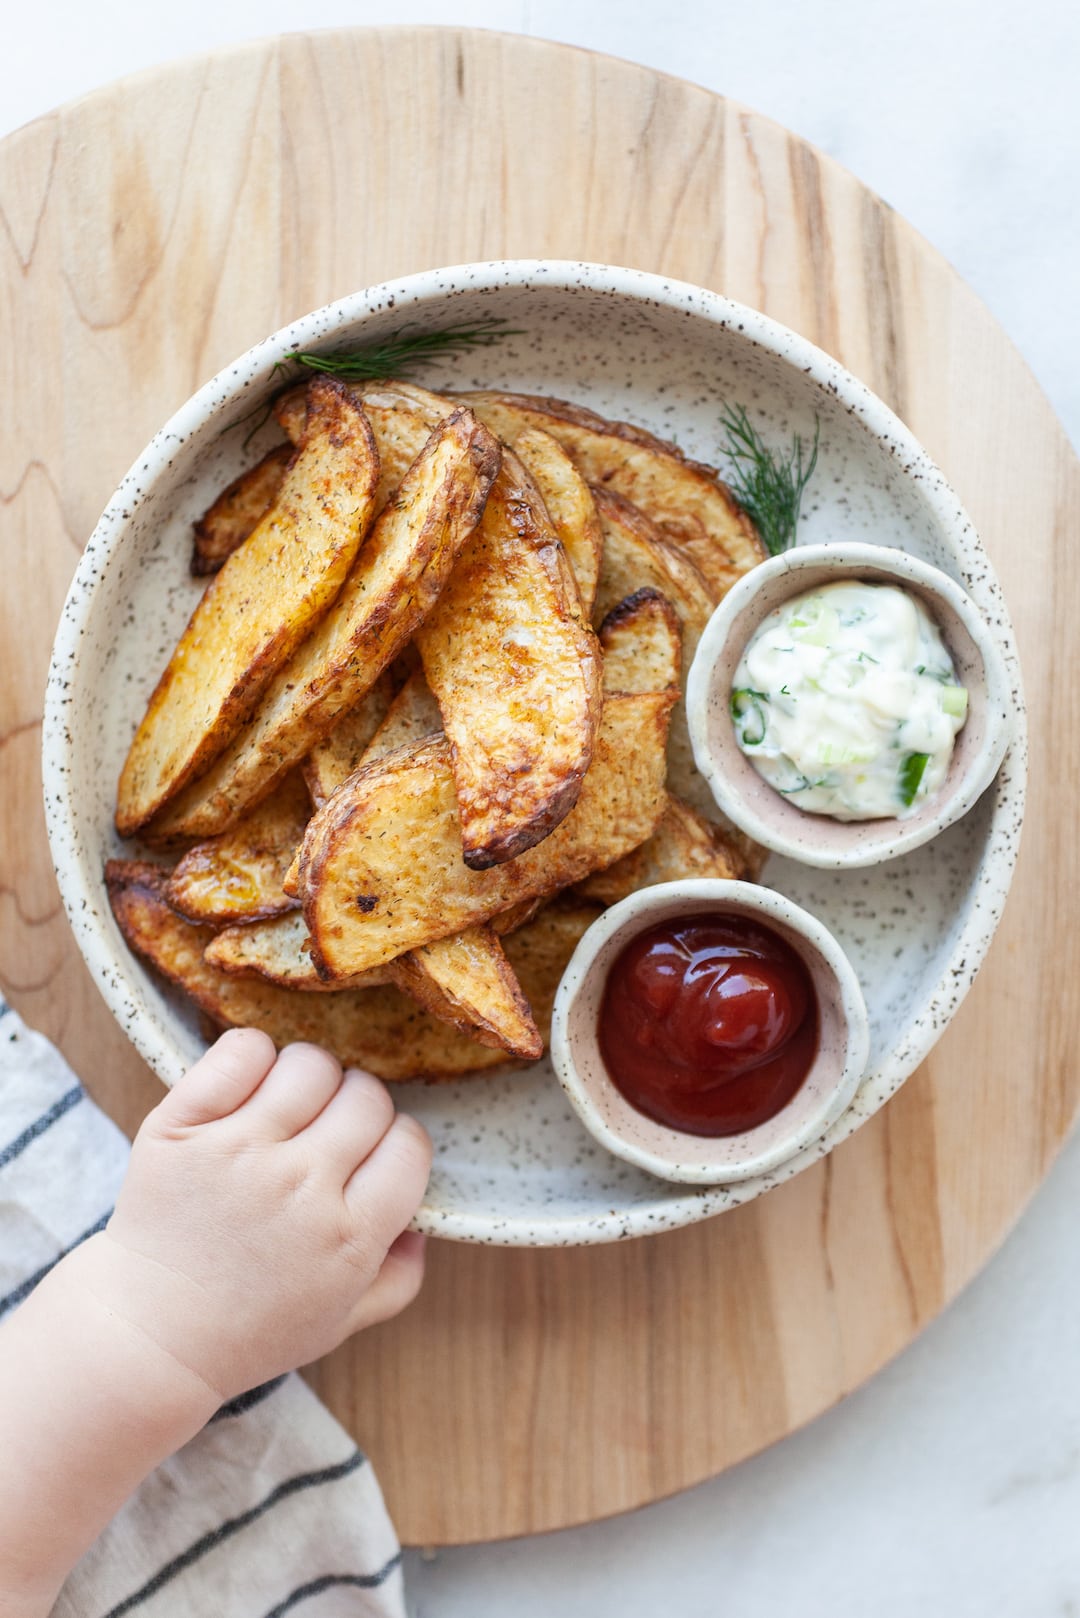 Air Fried Potato Wedges on a plate with a small Childs hand reaching for the plate